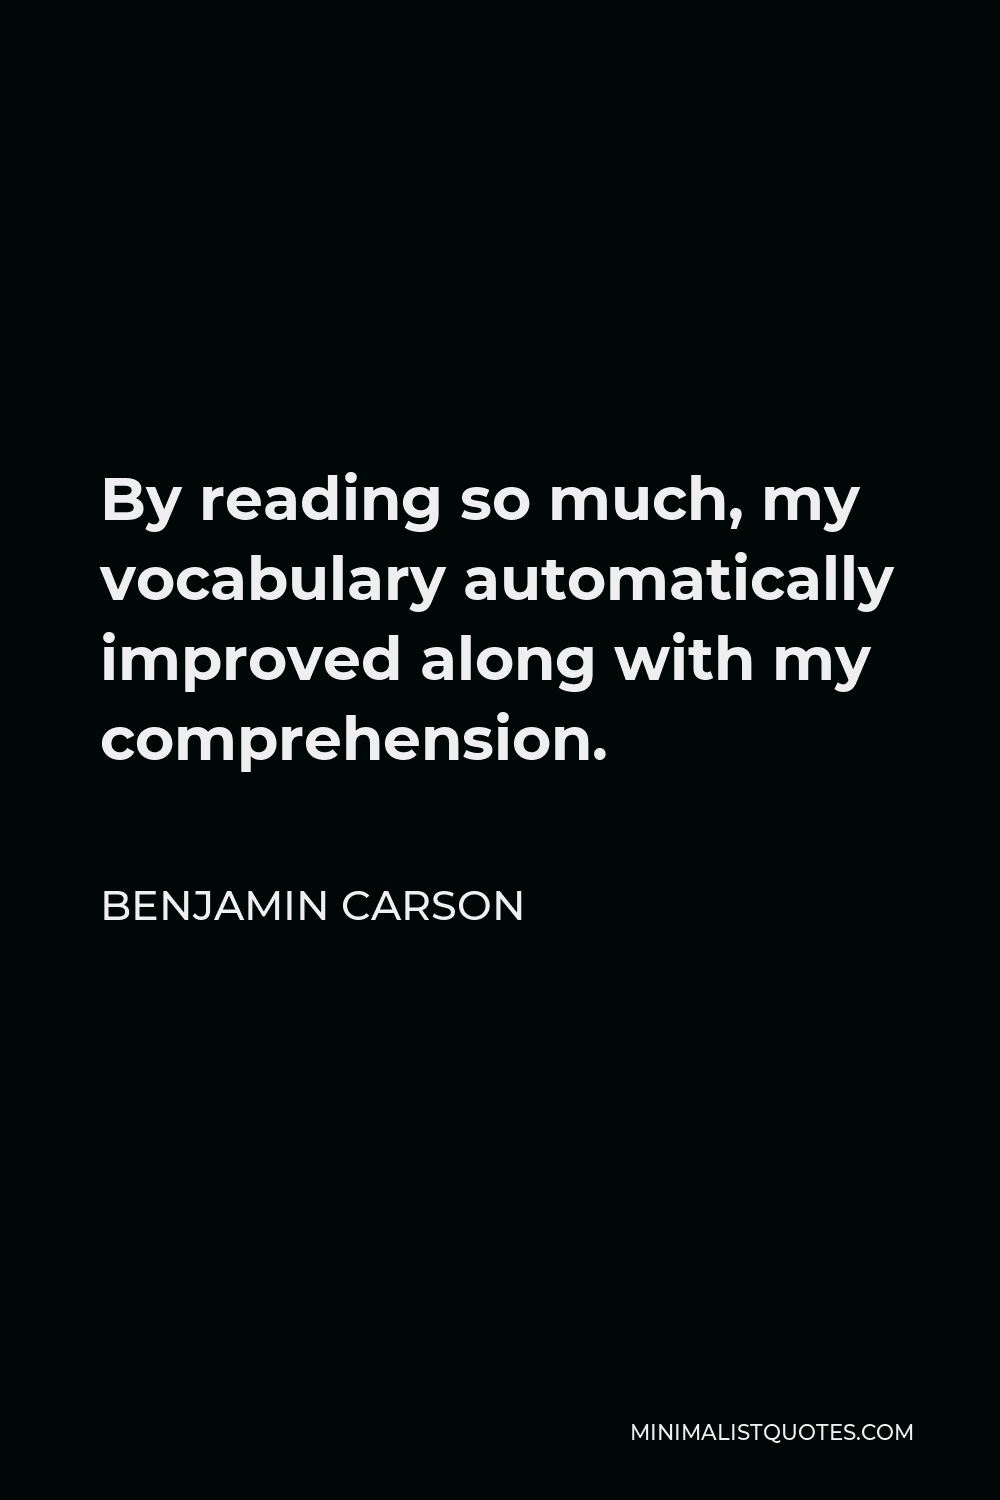 Benjamin Carson Quote - By reading so much, my vocabulary automatically improved along with my comprehension.